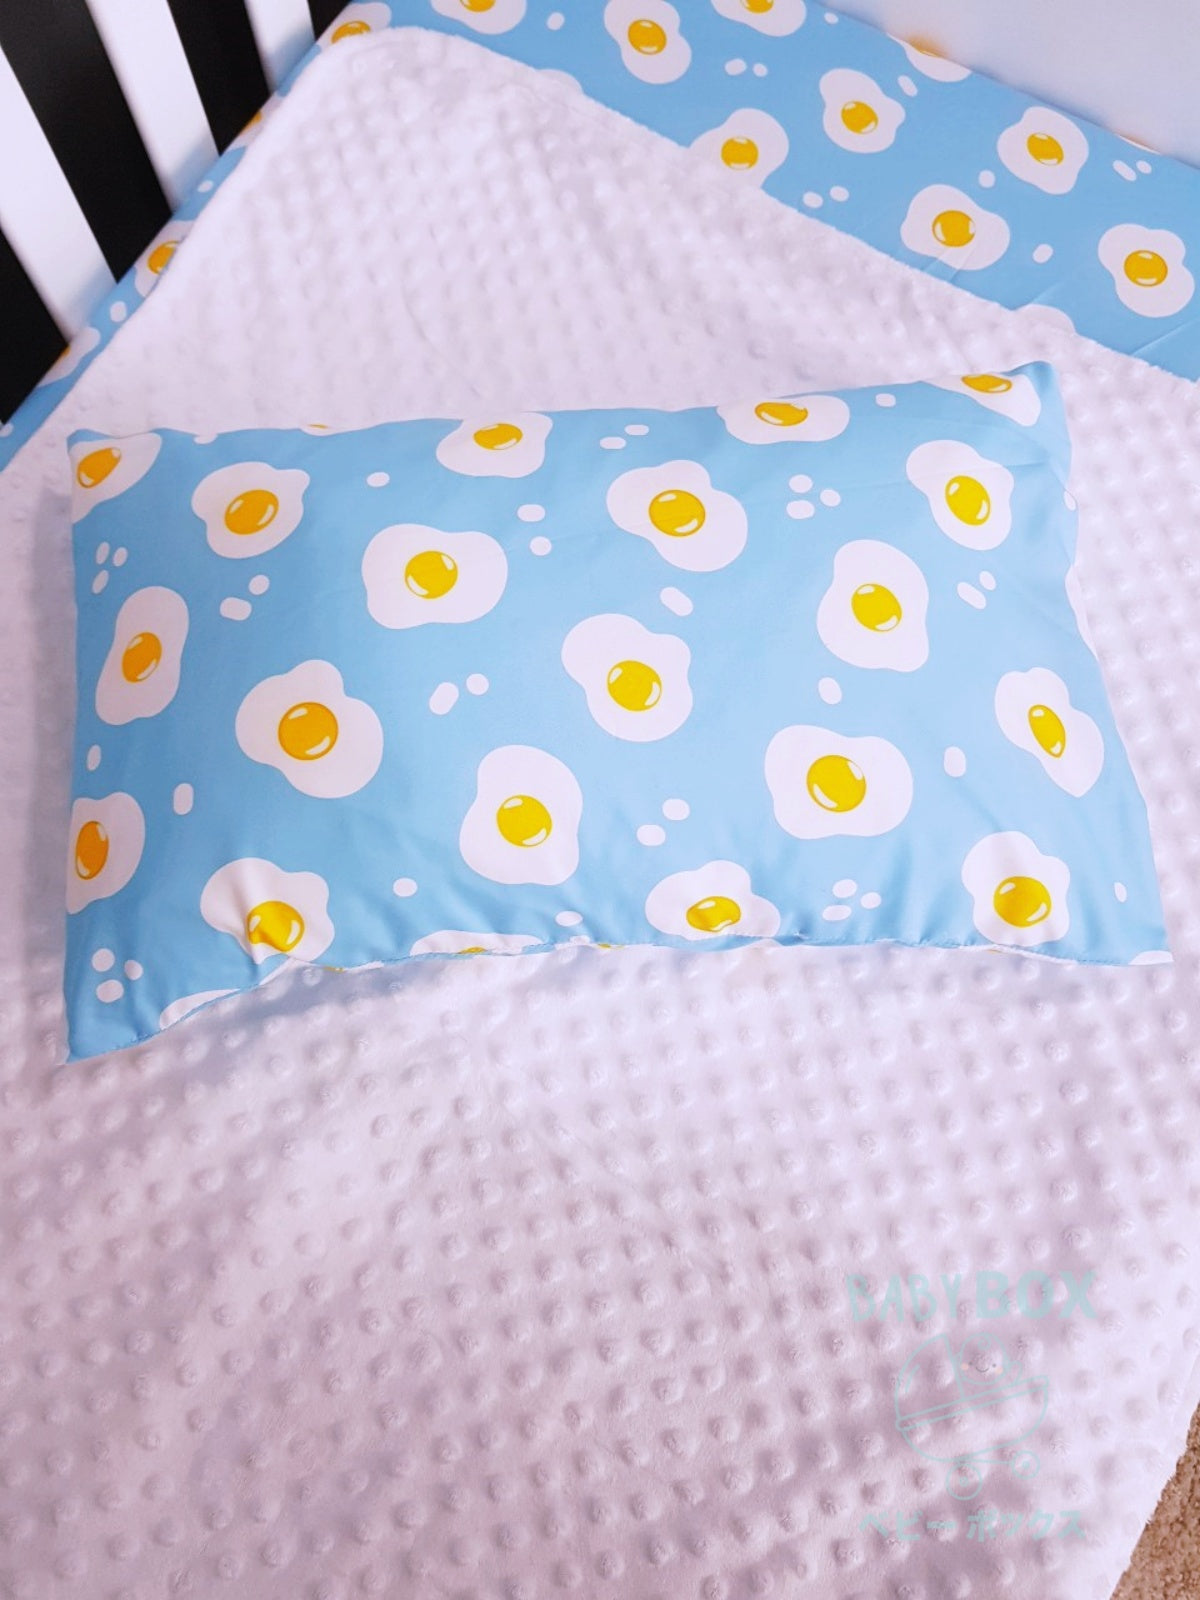 Toddler Sized Pillow Cover